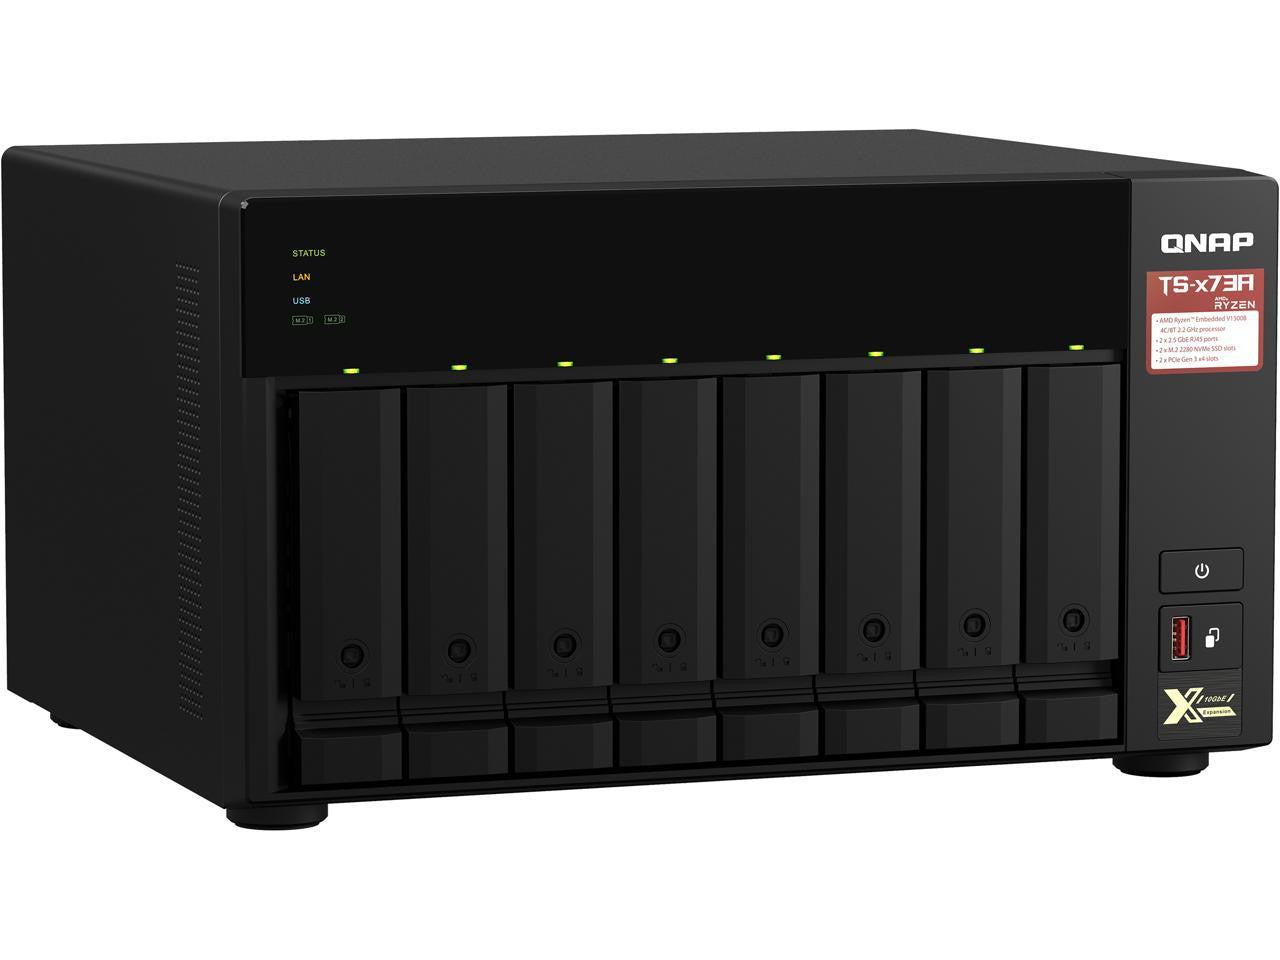 QNAP TS-873A 8-BAY NAS with 8GB DDR4 RAM and 16TB (8x2TB) Western Digital RED PLUS Drives Fully Assembled and Tested